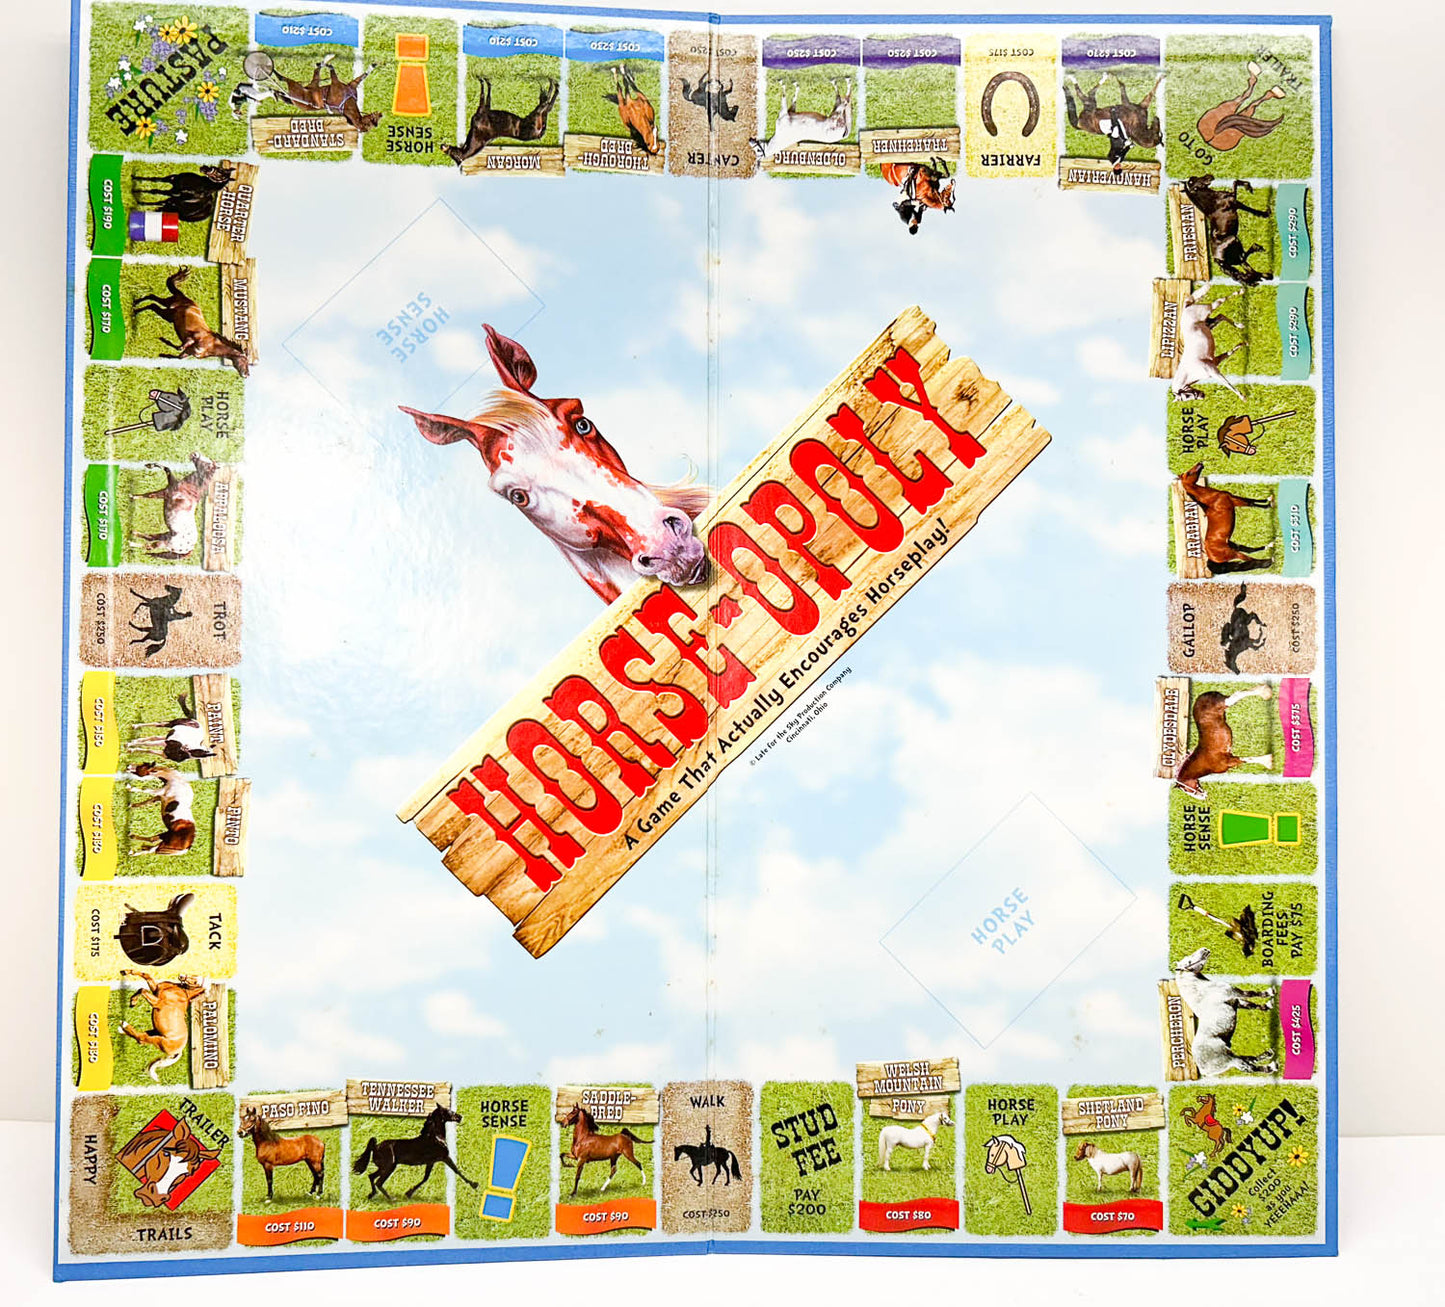 Horse-Opoly Game with Original Box